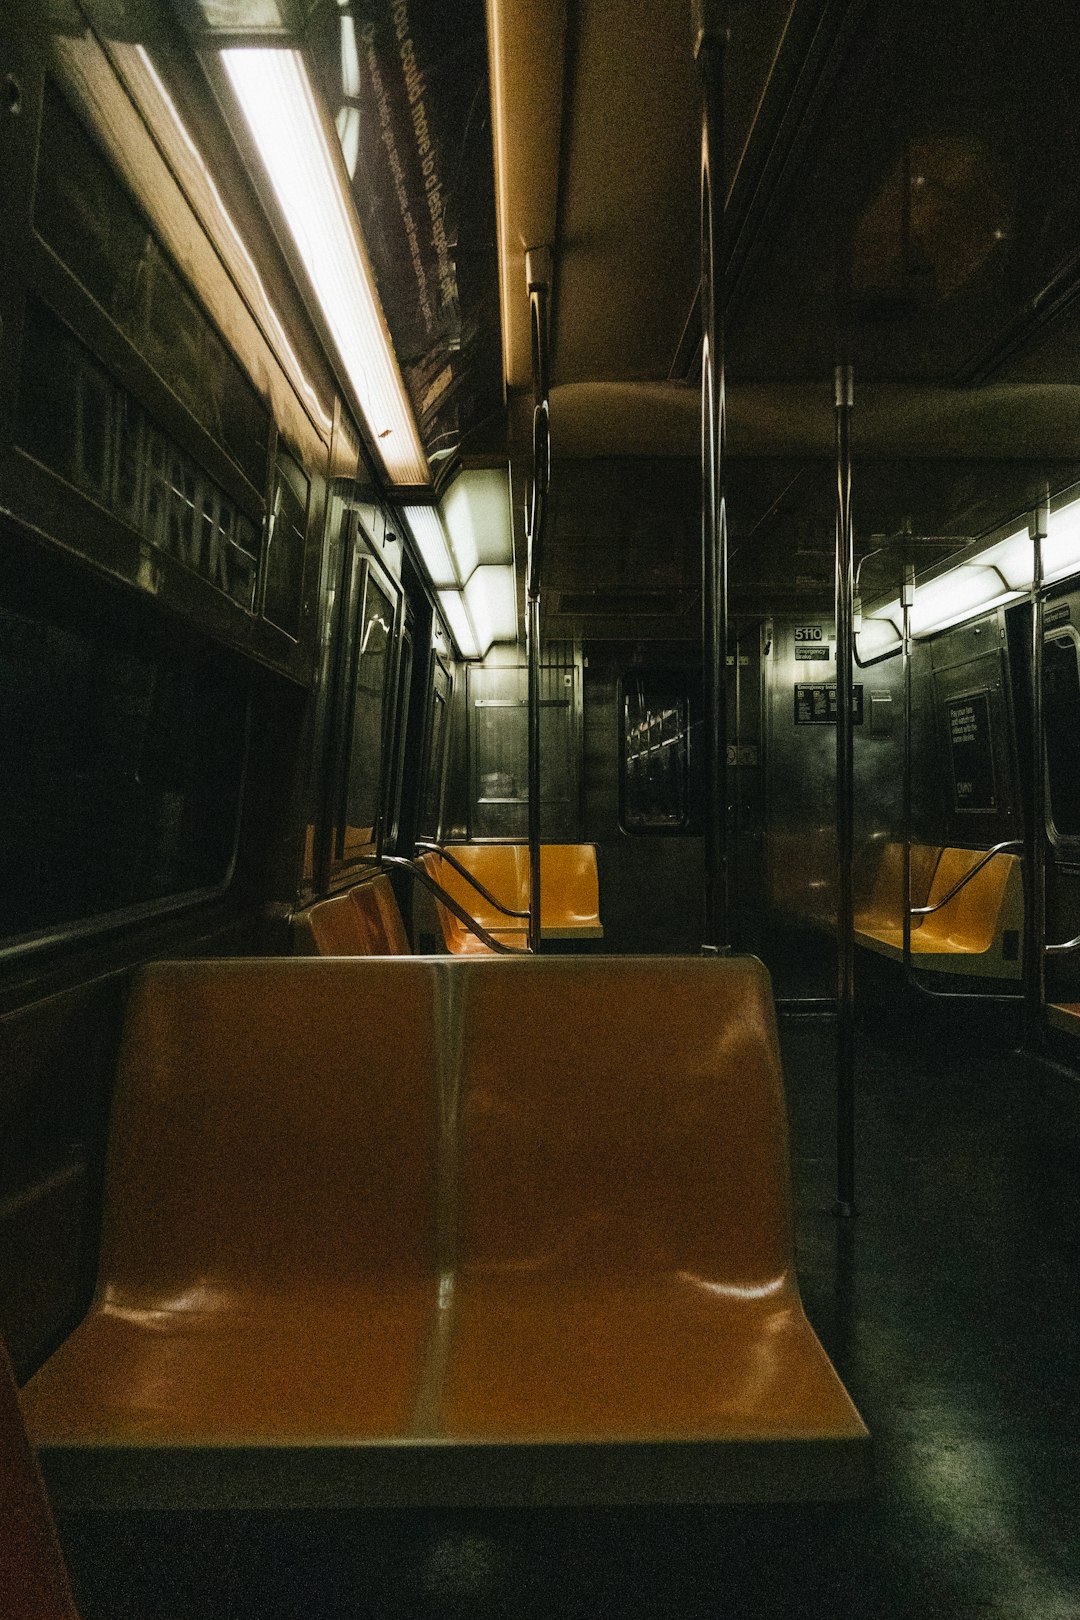 brown leather bus seat during night time